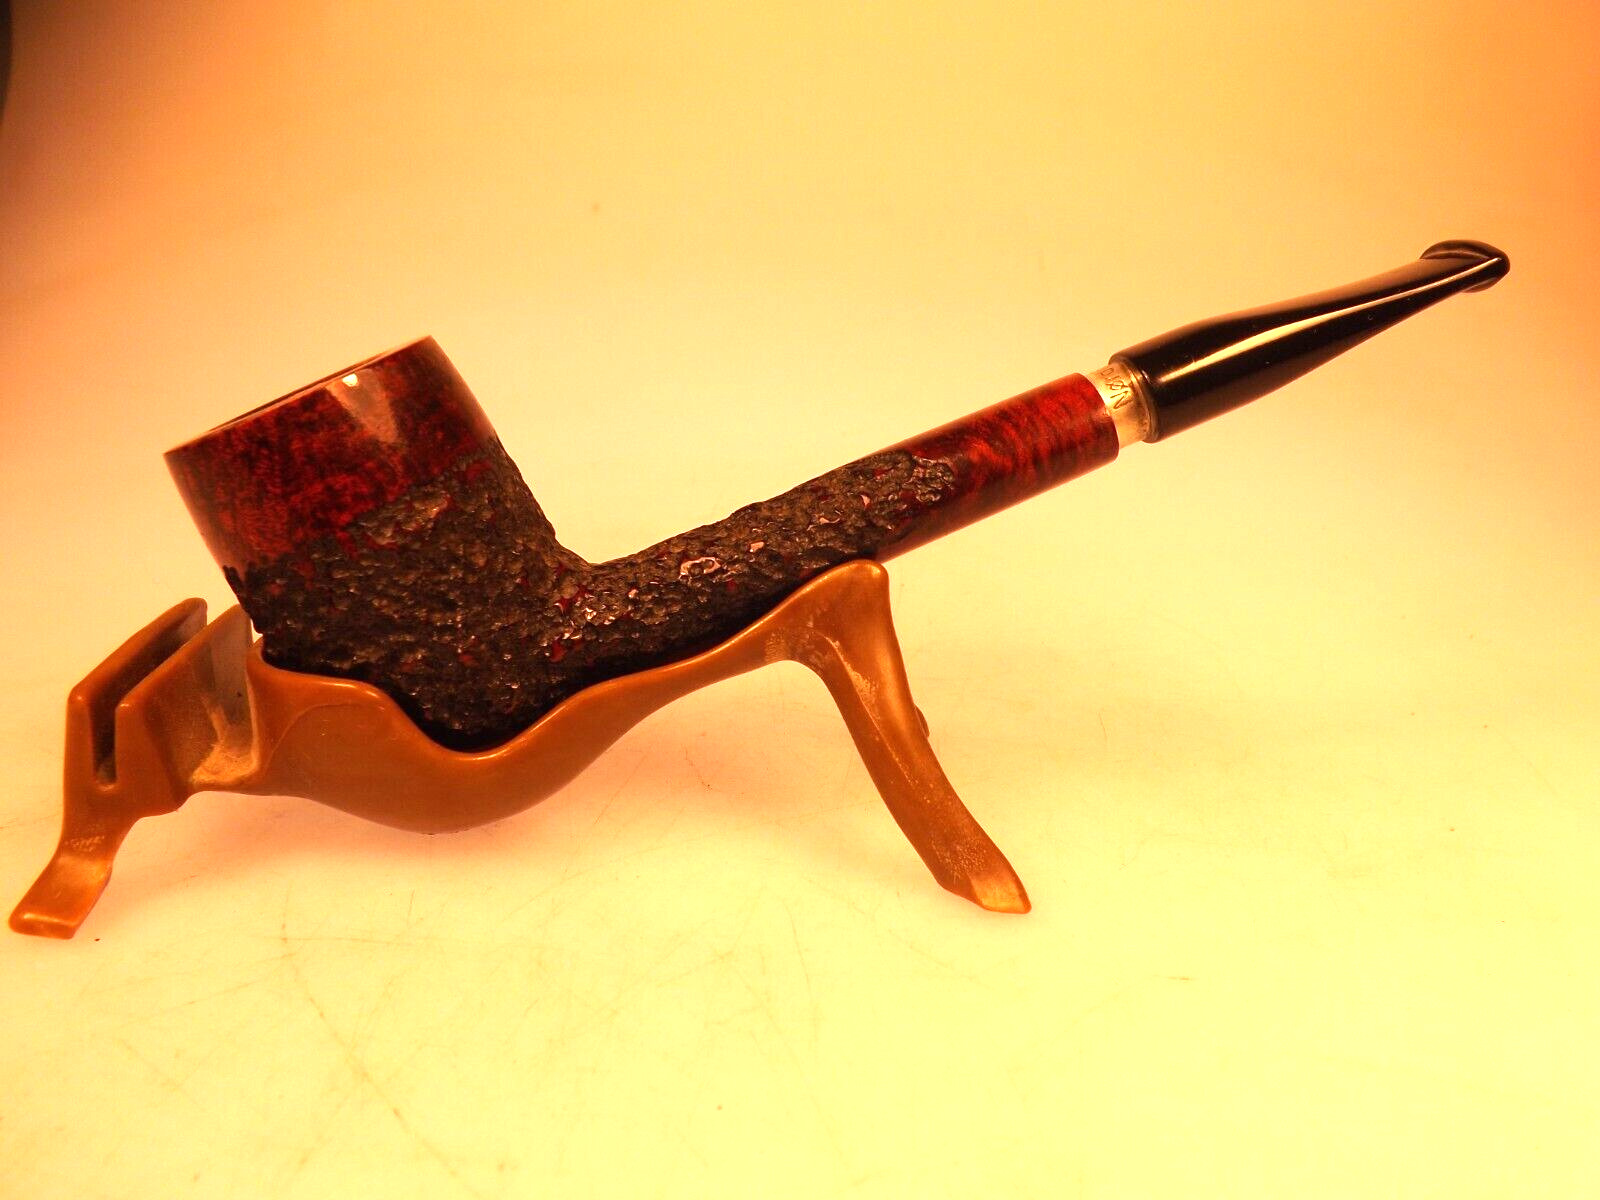 Nording Denmark Canadian 925 Nording Band Briar Pipe 80’s Acrylic Stem